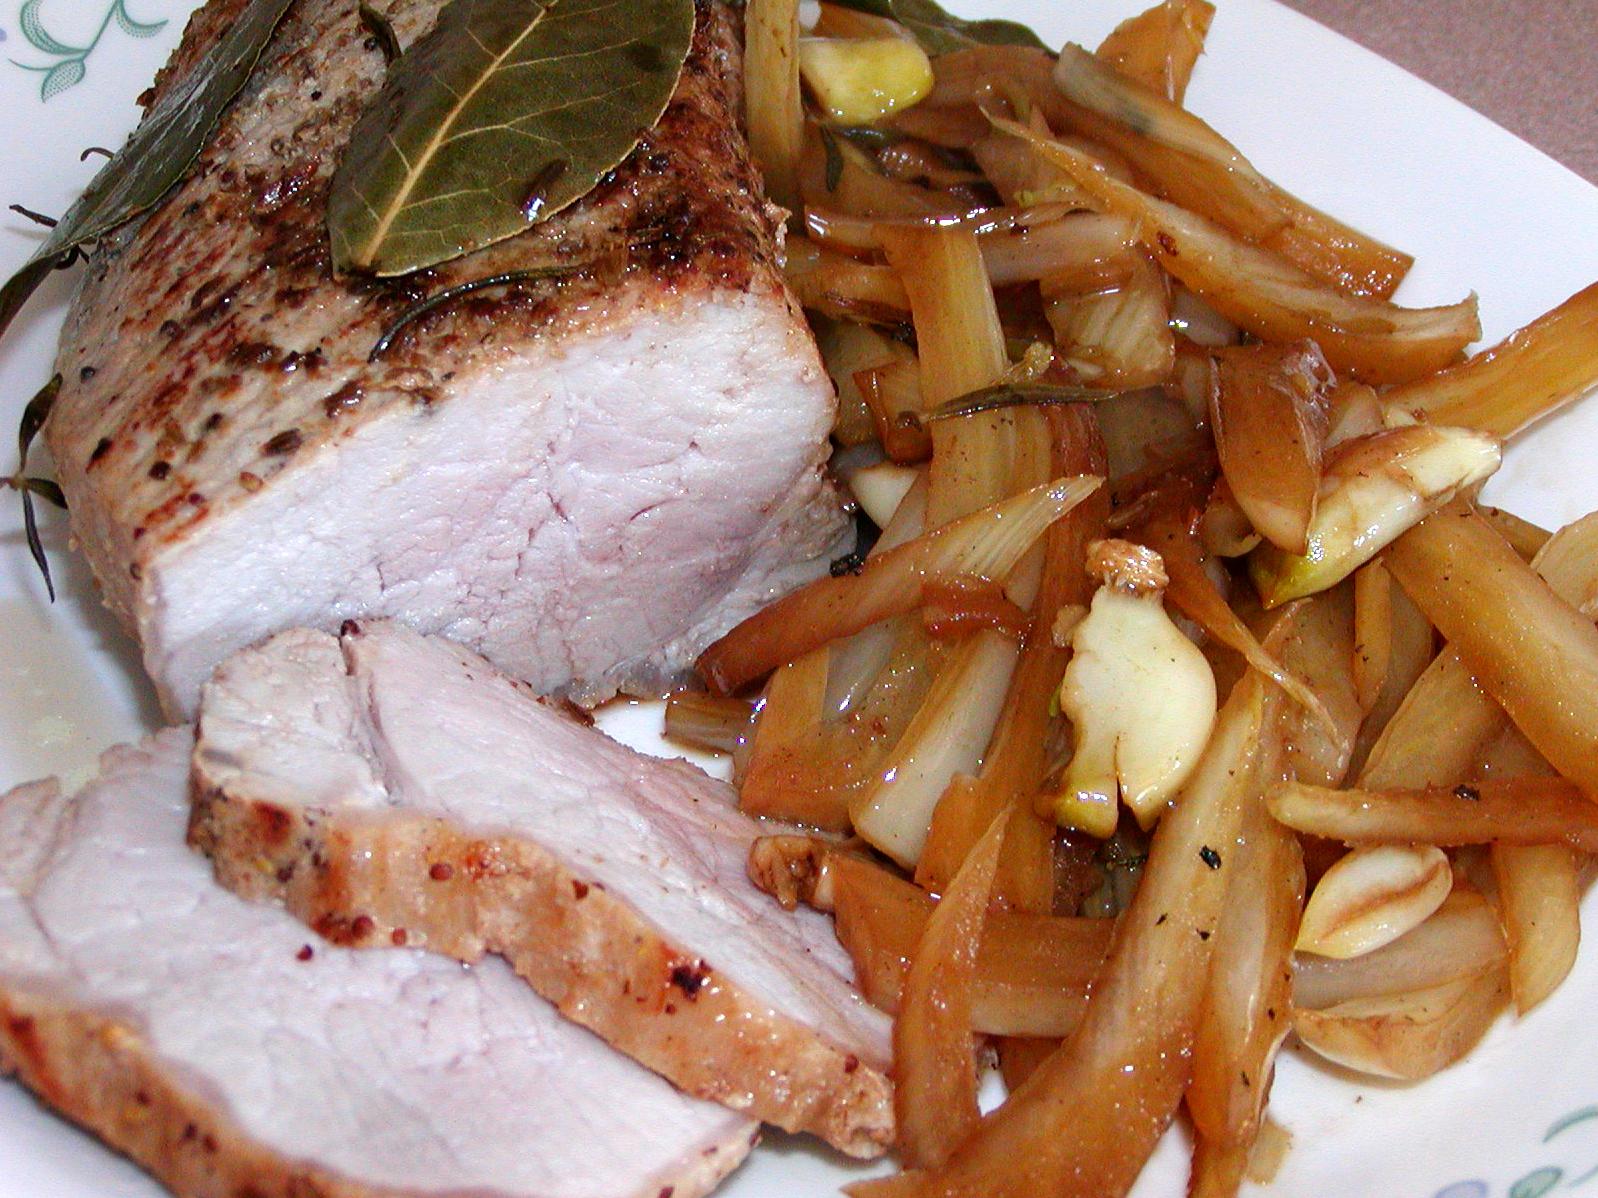  Tender pork loin cooked to perfection in a flavorful white wine sauce.